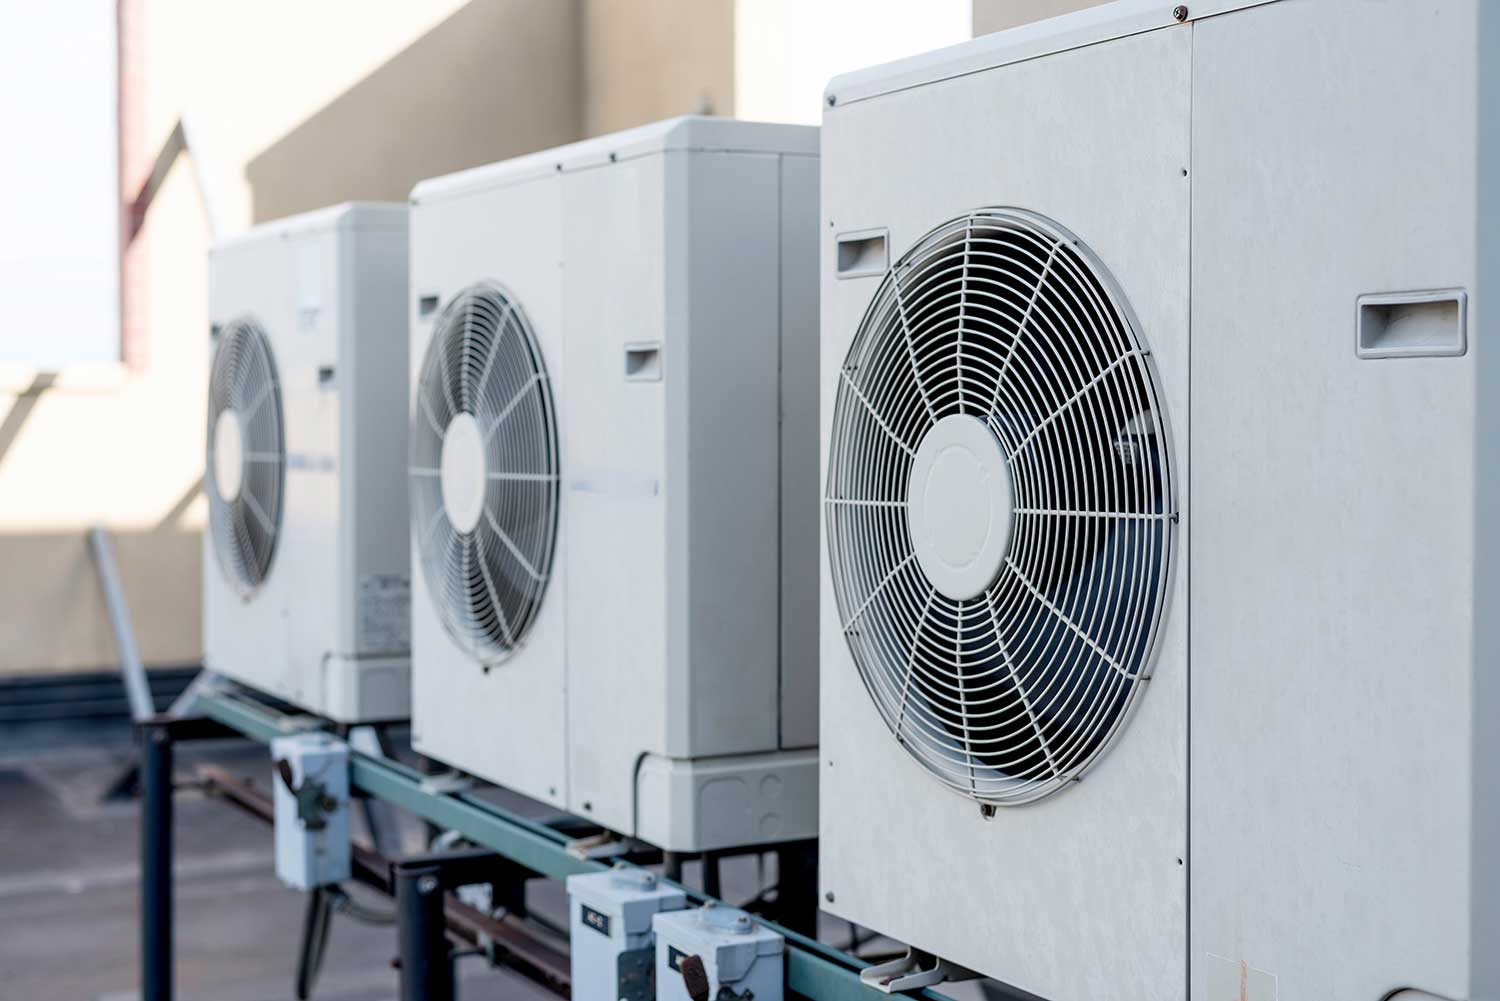 The more than 2 aspects of a cooling and heating provider